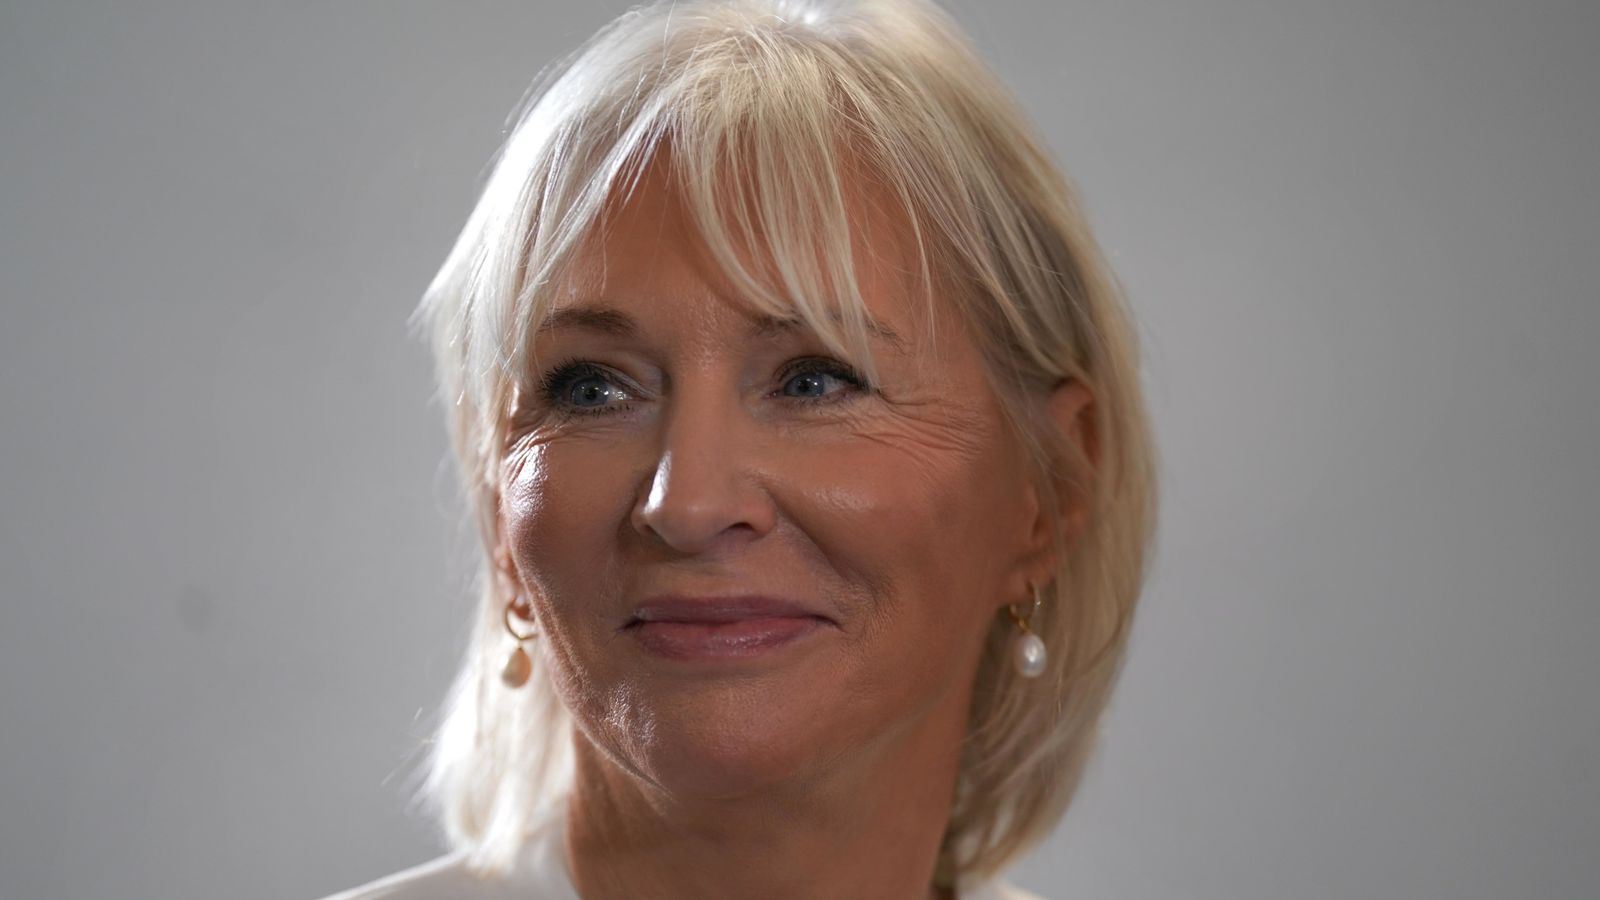 Another council calls for Nadine Dorries to stand down as MP